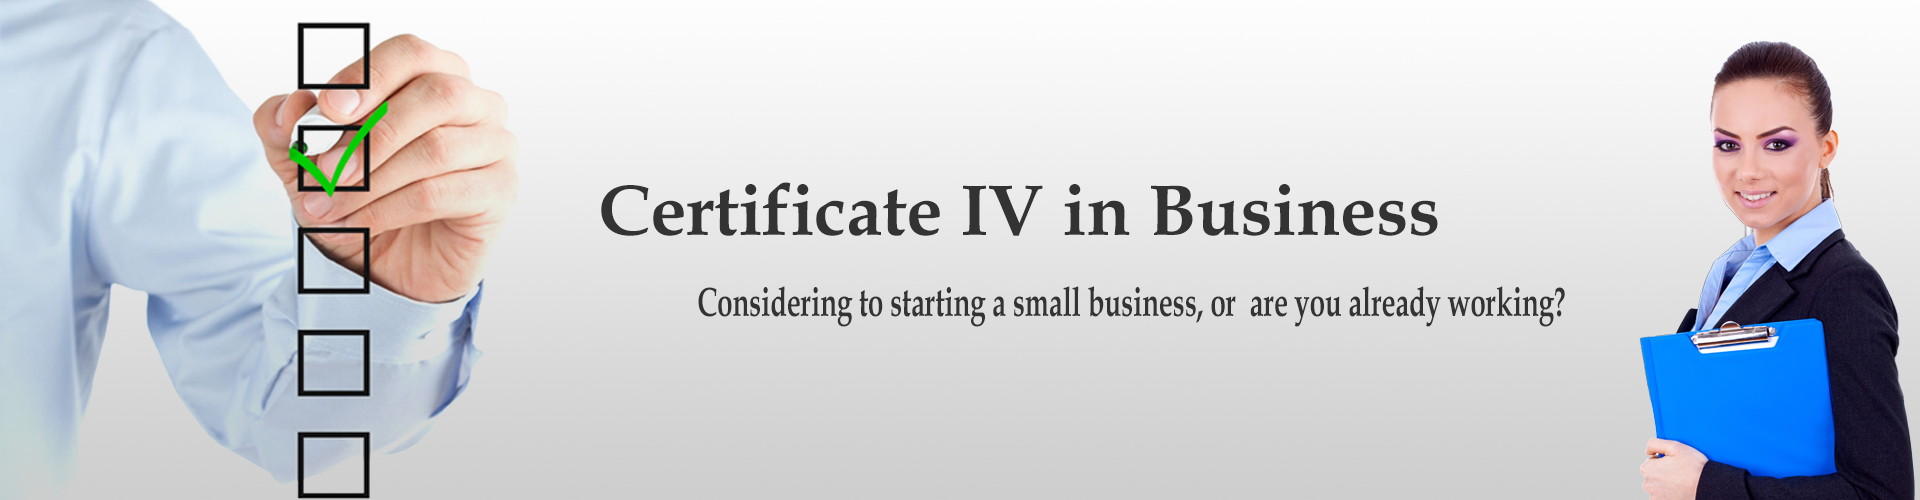 Certificate IV in Business